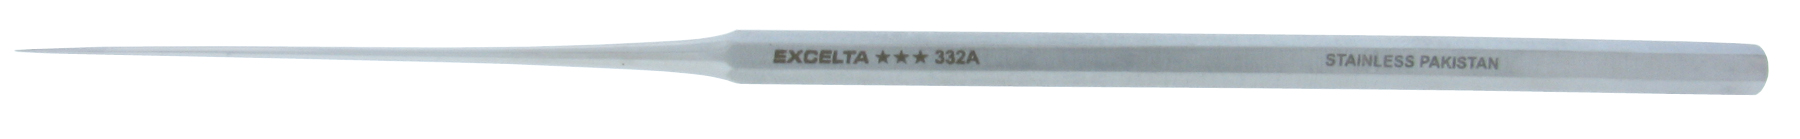 Excelta 332A 6.5 Inch Stainless Steel Straight Probe With .010 Inch Tip